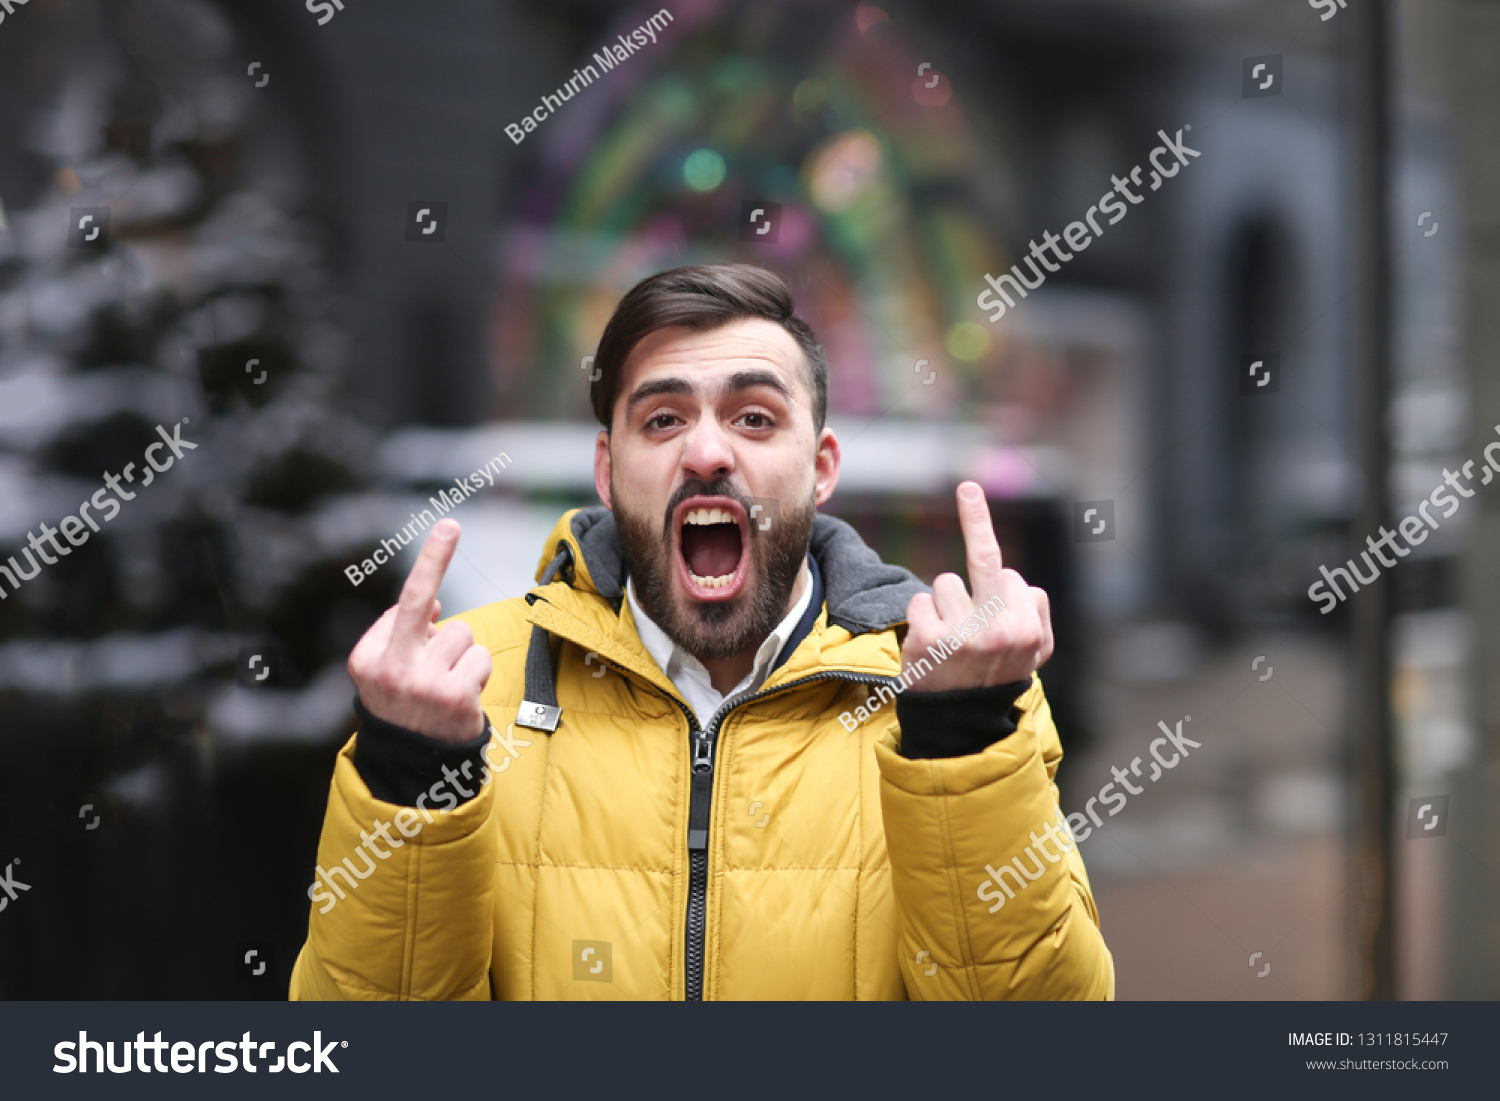 Guy, fuck you, fuck, fuck off, hand gesture, bad boy, man, face, evil, hate, people, style, young, mood, life, lifestyle, gestures, rage, fan, football, emotion, emotions, emotional, aggressive
 #1311815447